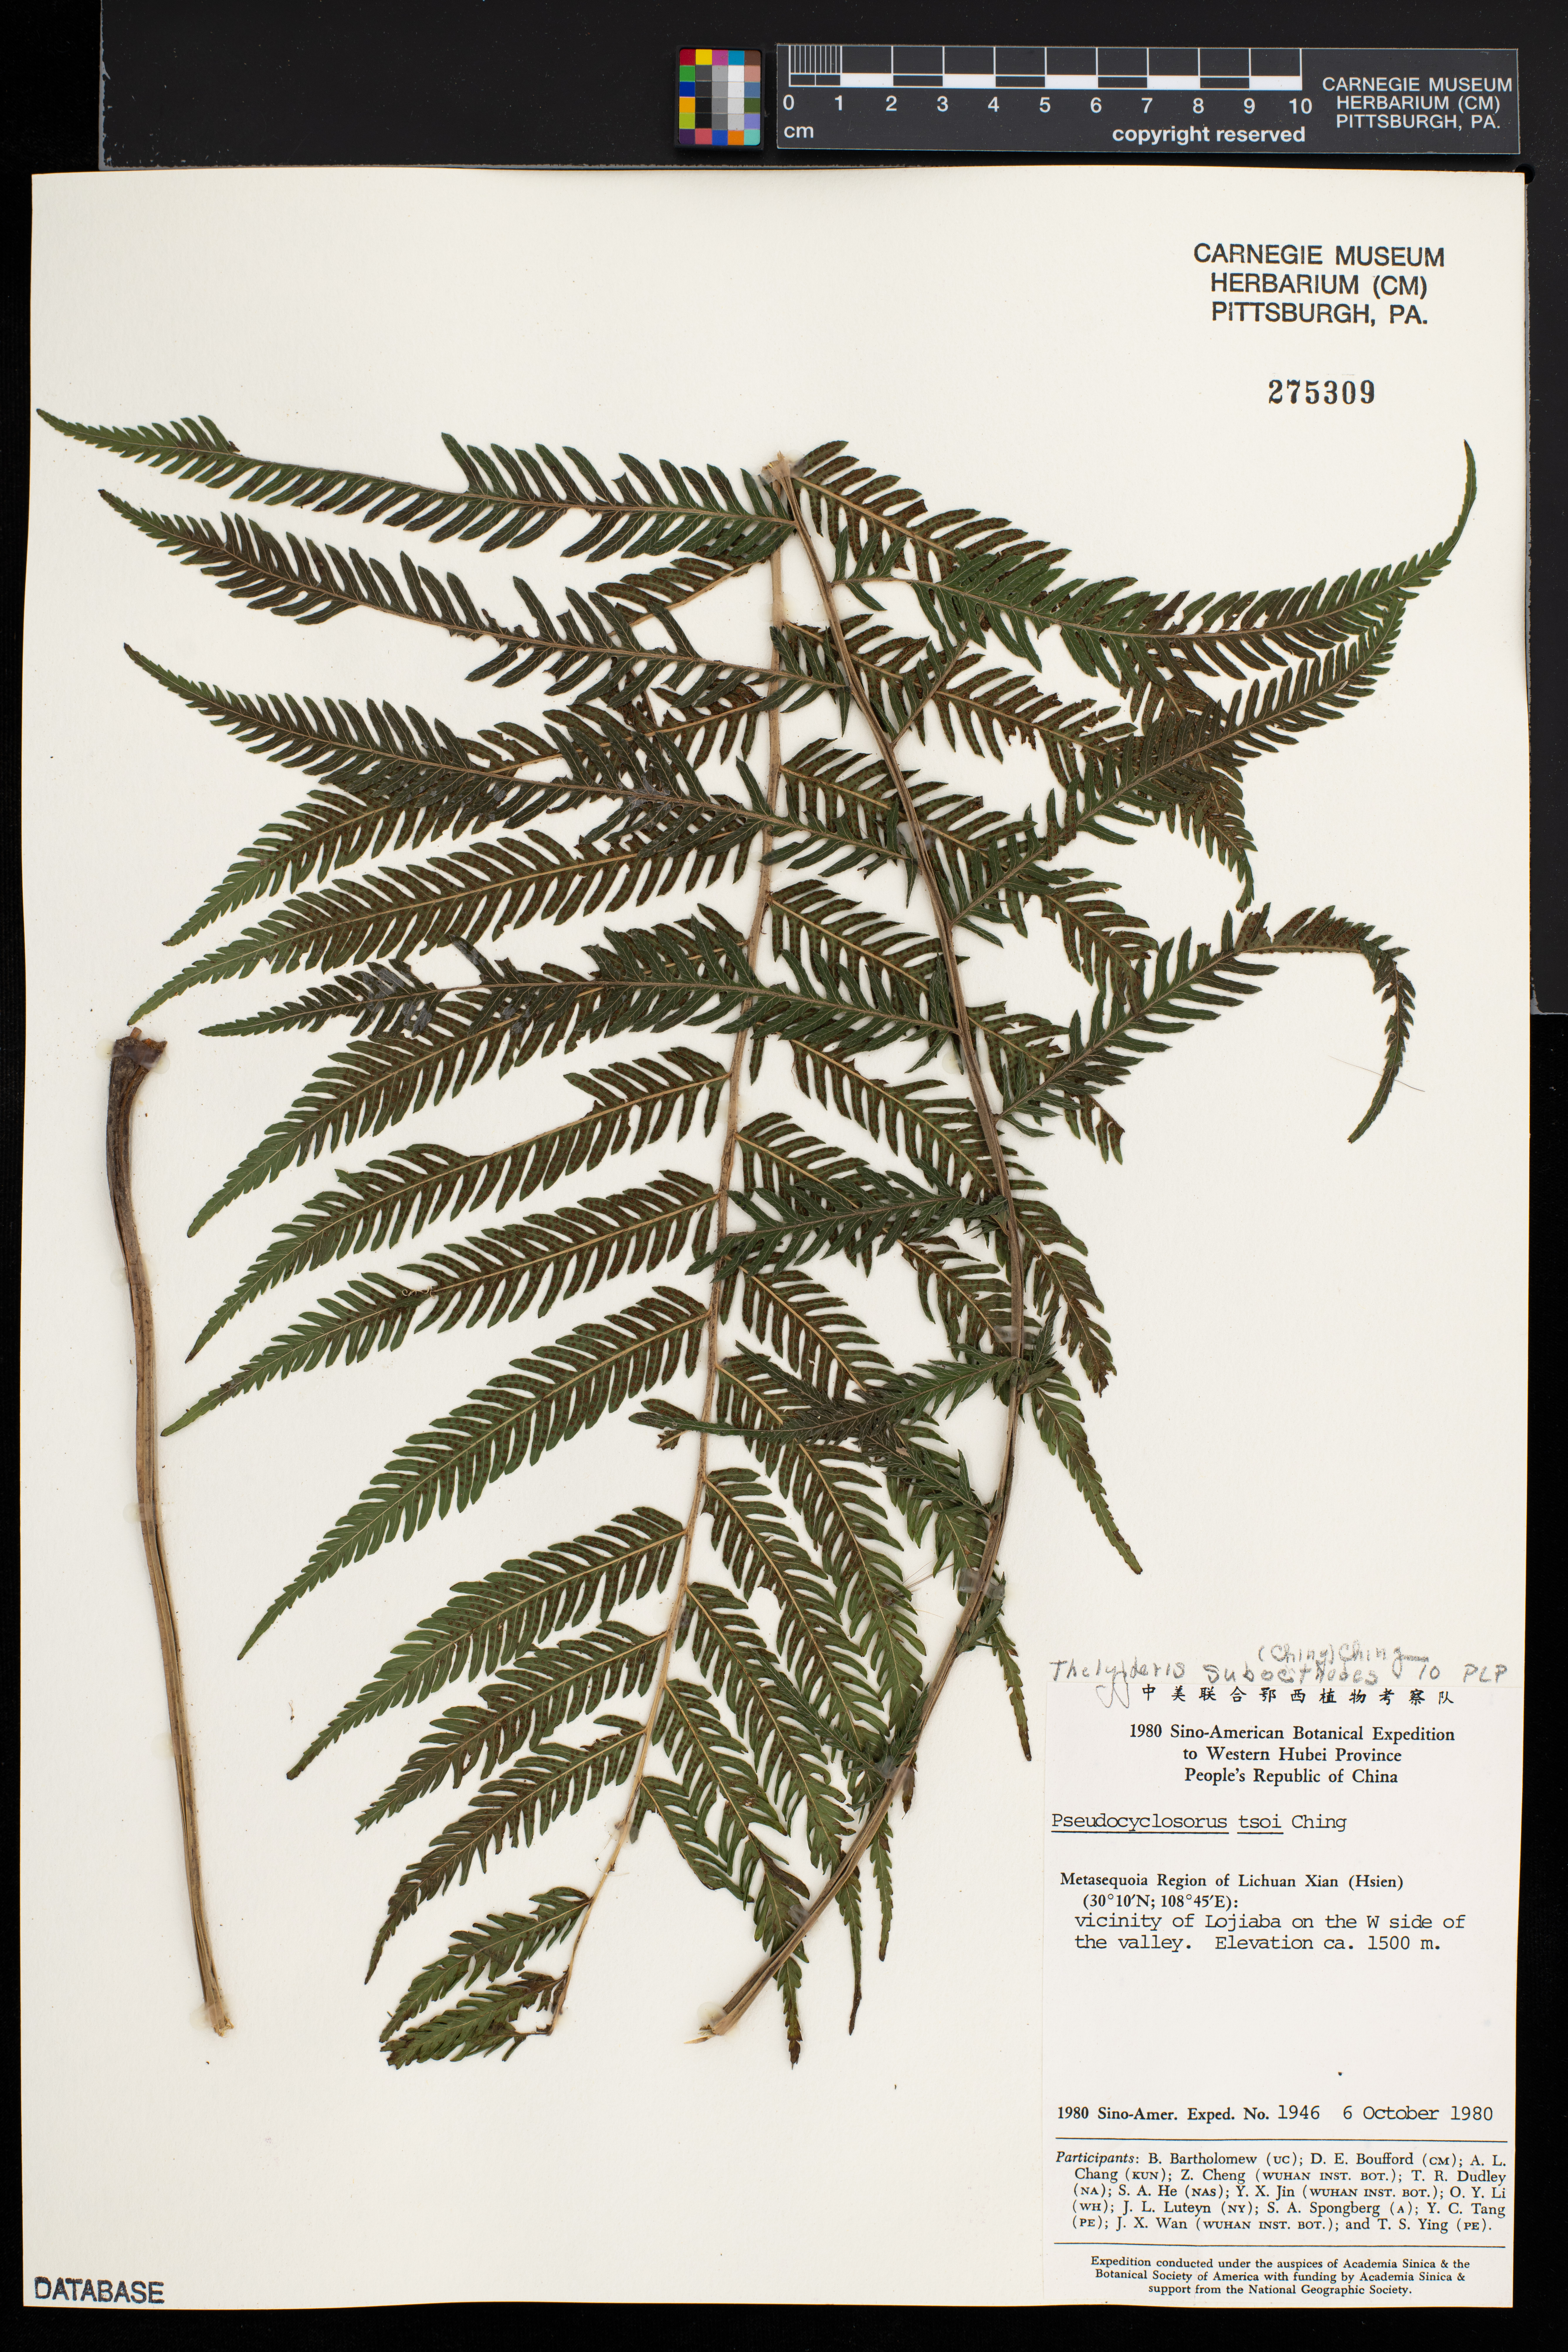 Thelypteris subochthodes image